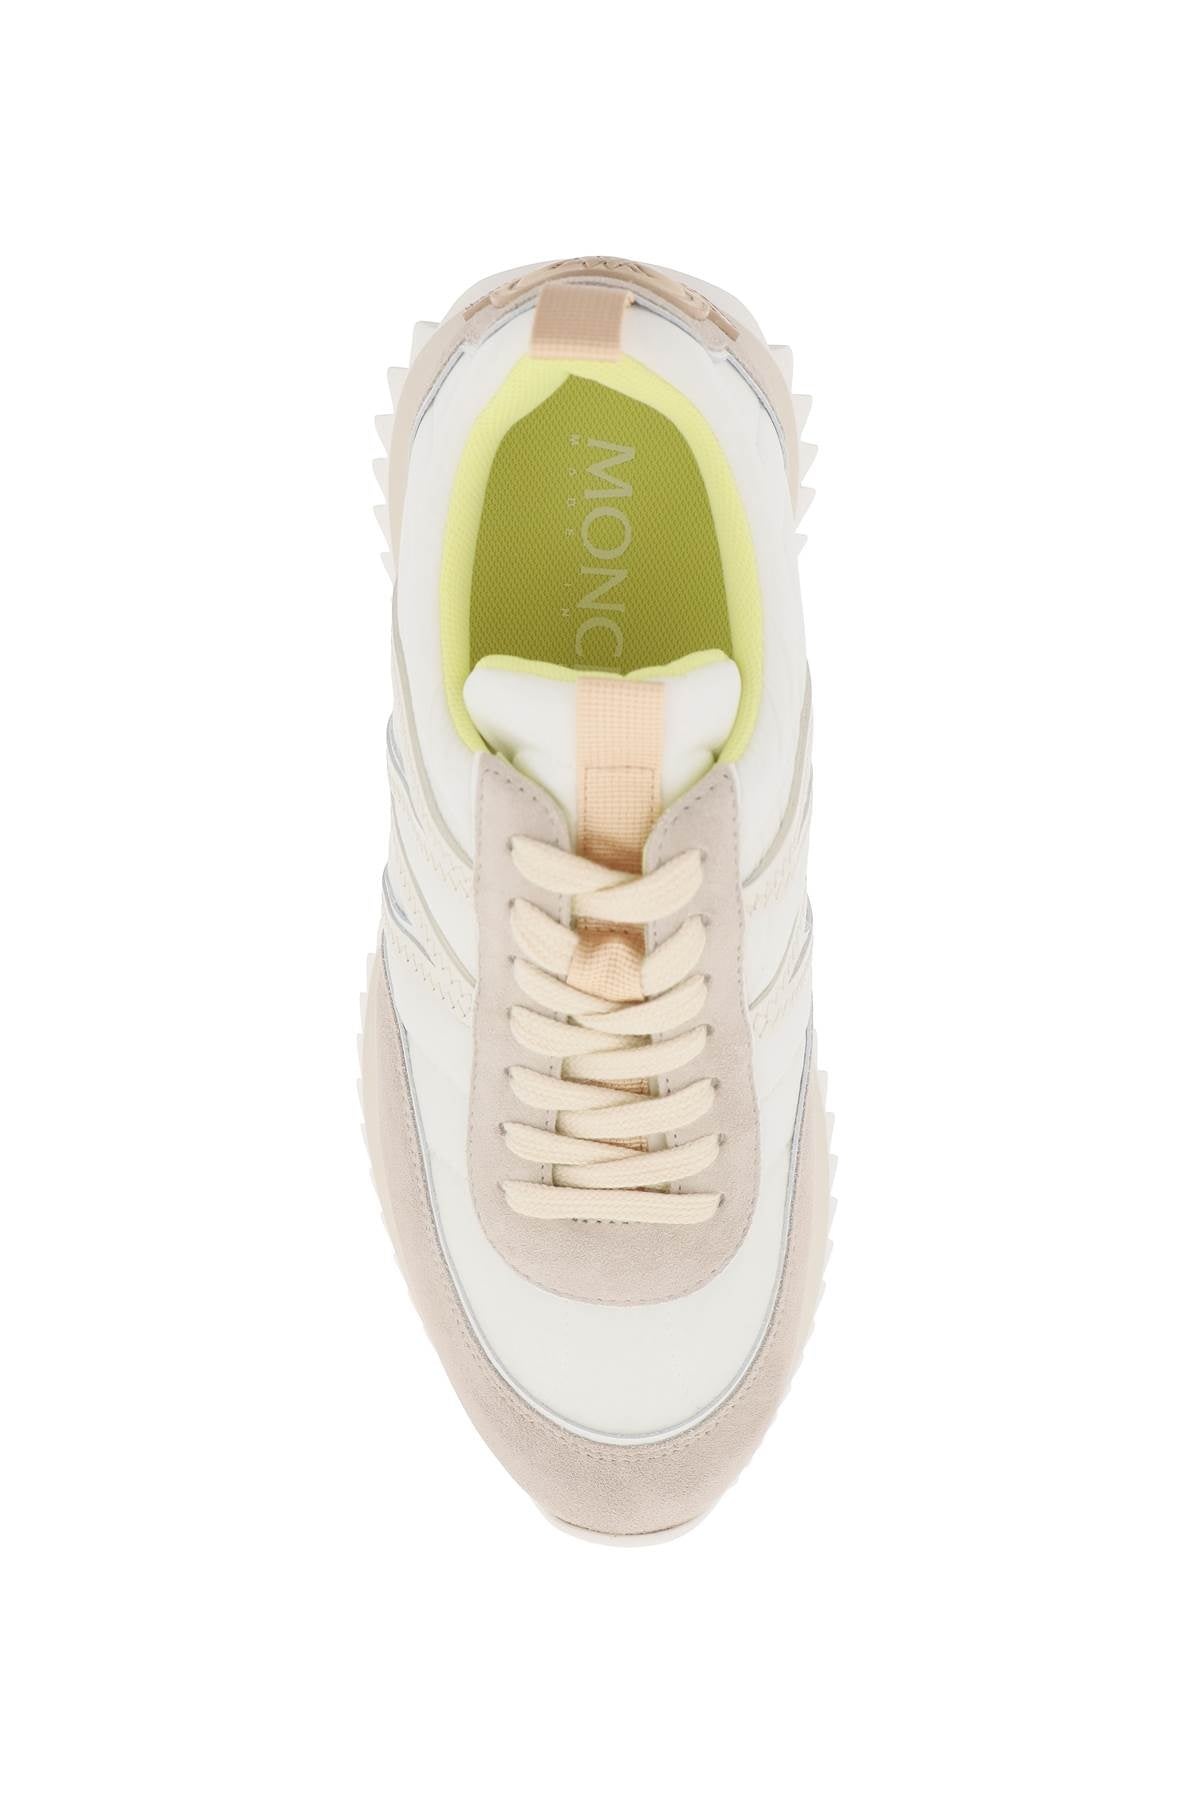 Moncler Basic Pacey Sneakers In Nylon And Suede Leather. Women - 2